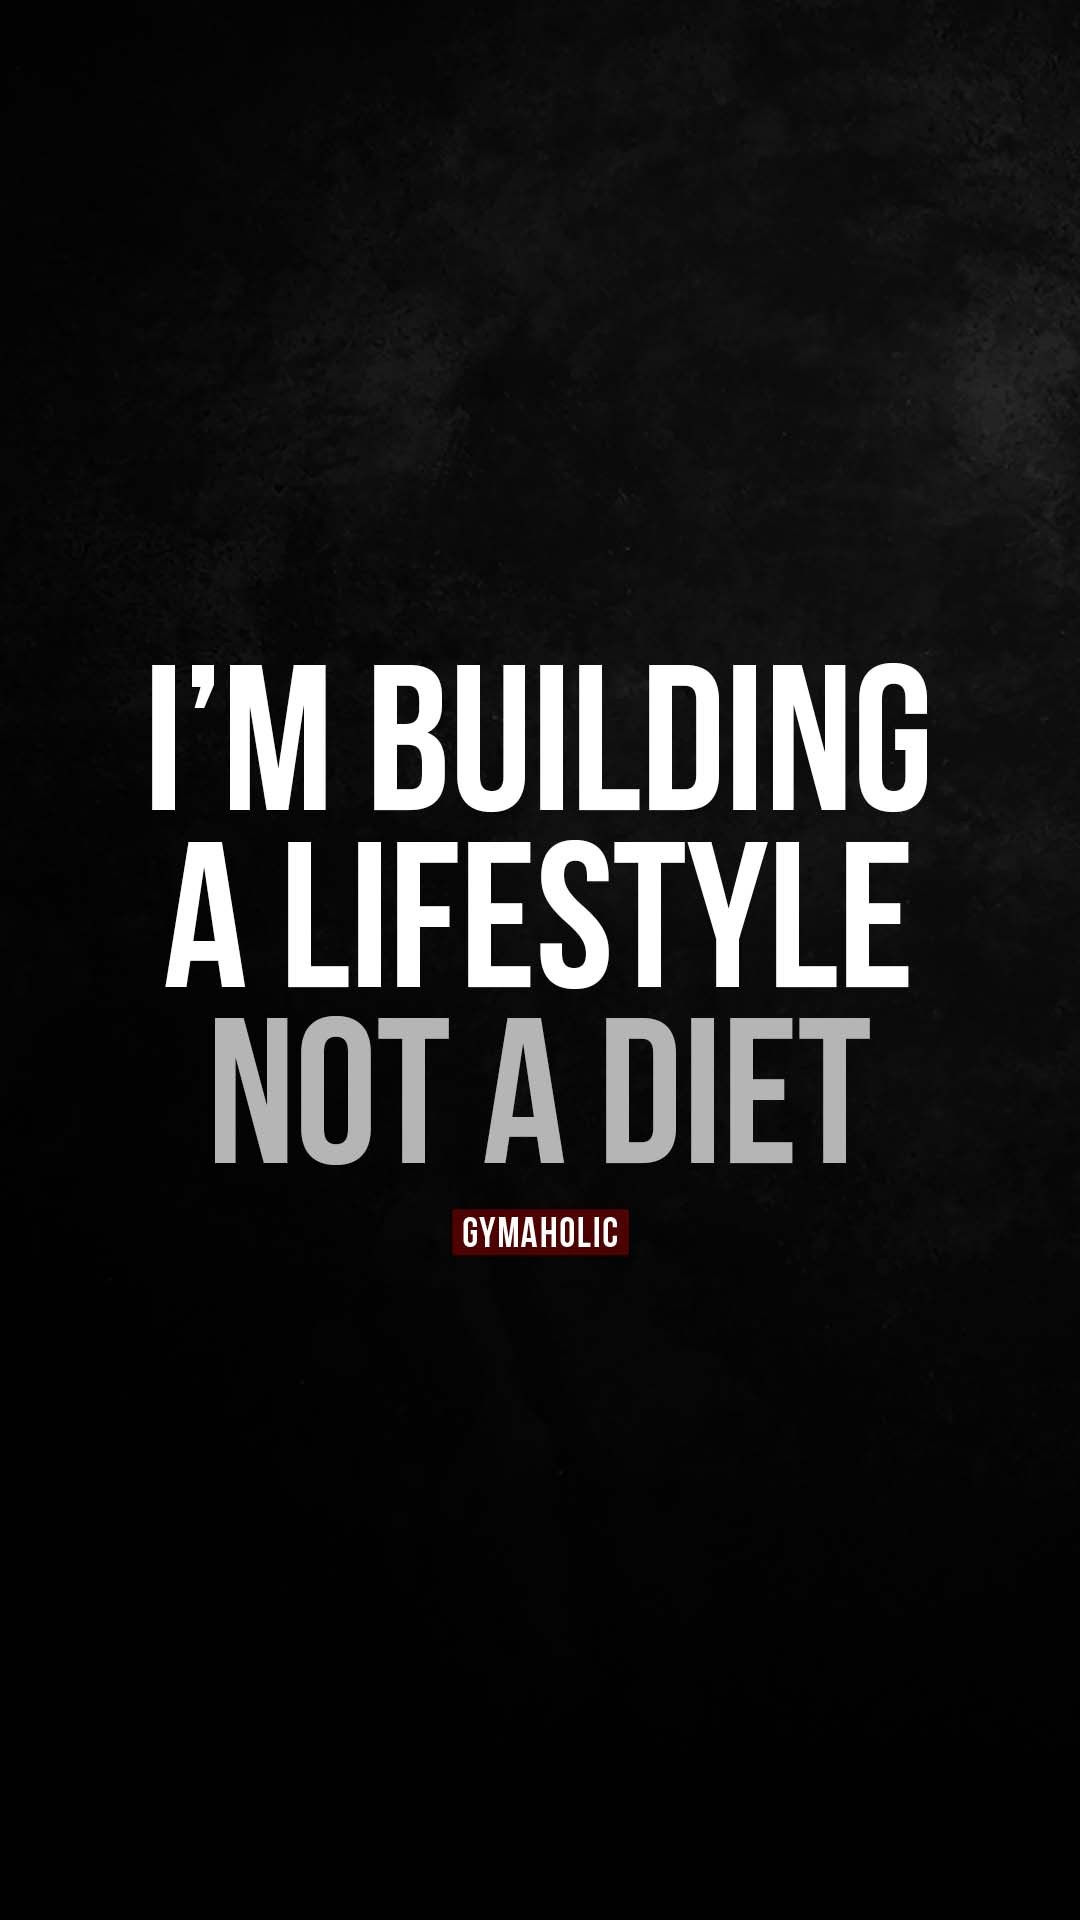 I’m building a lifestyle, not a diet